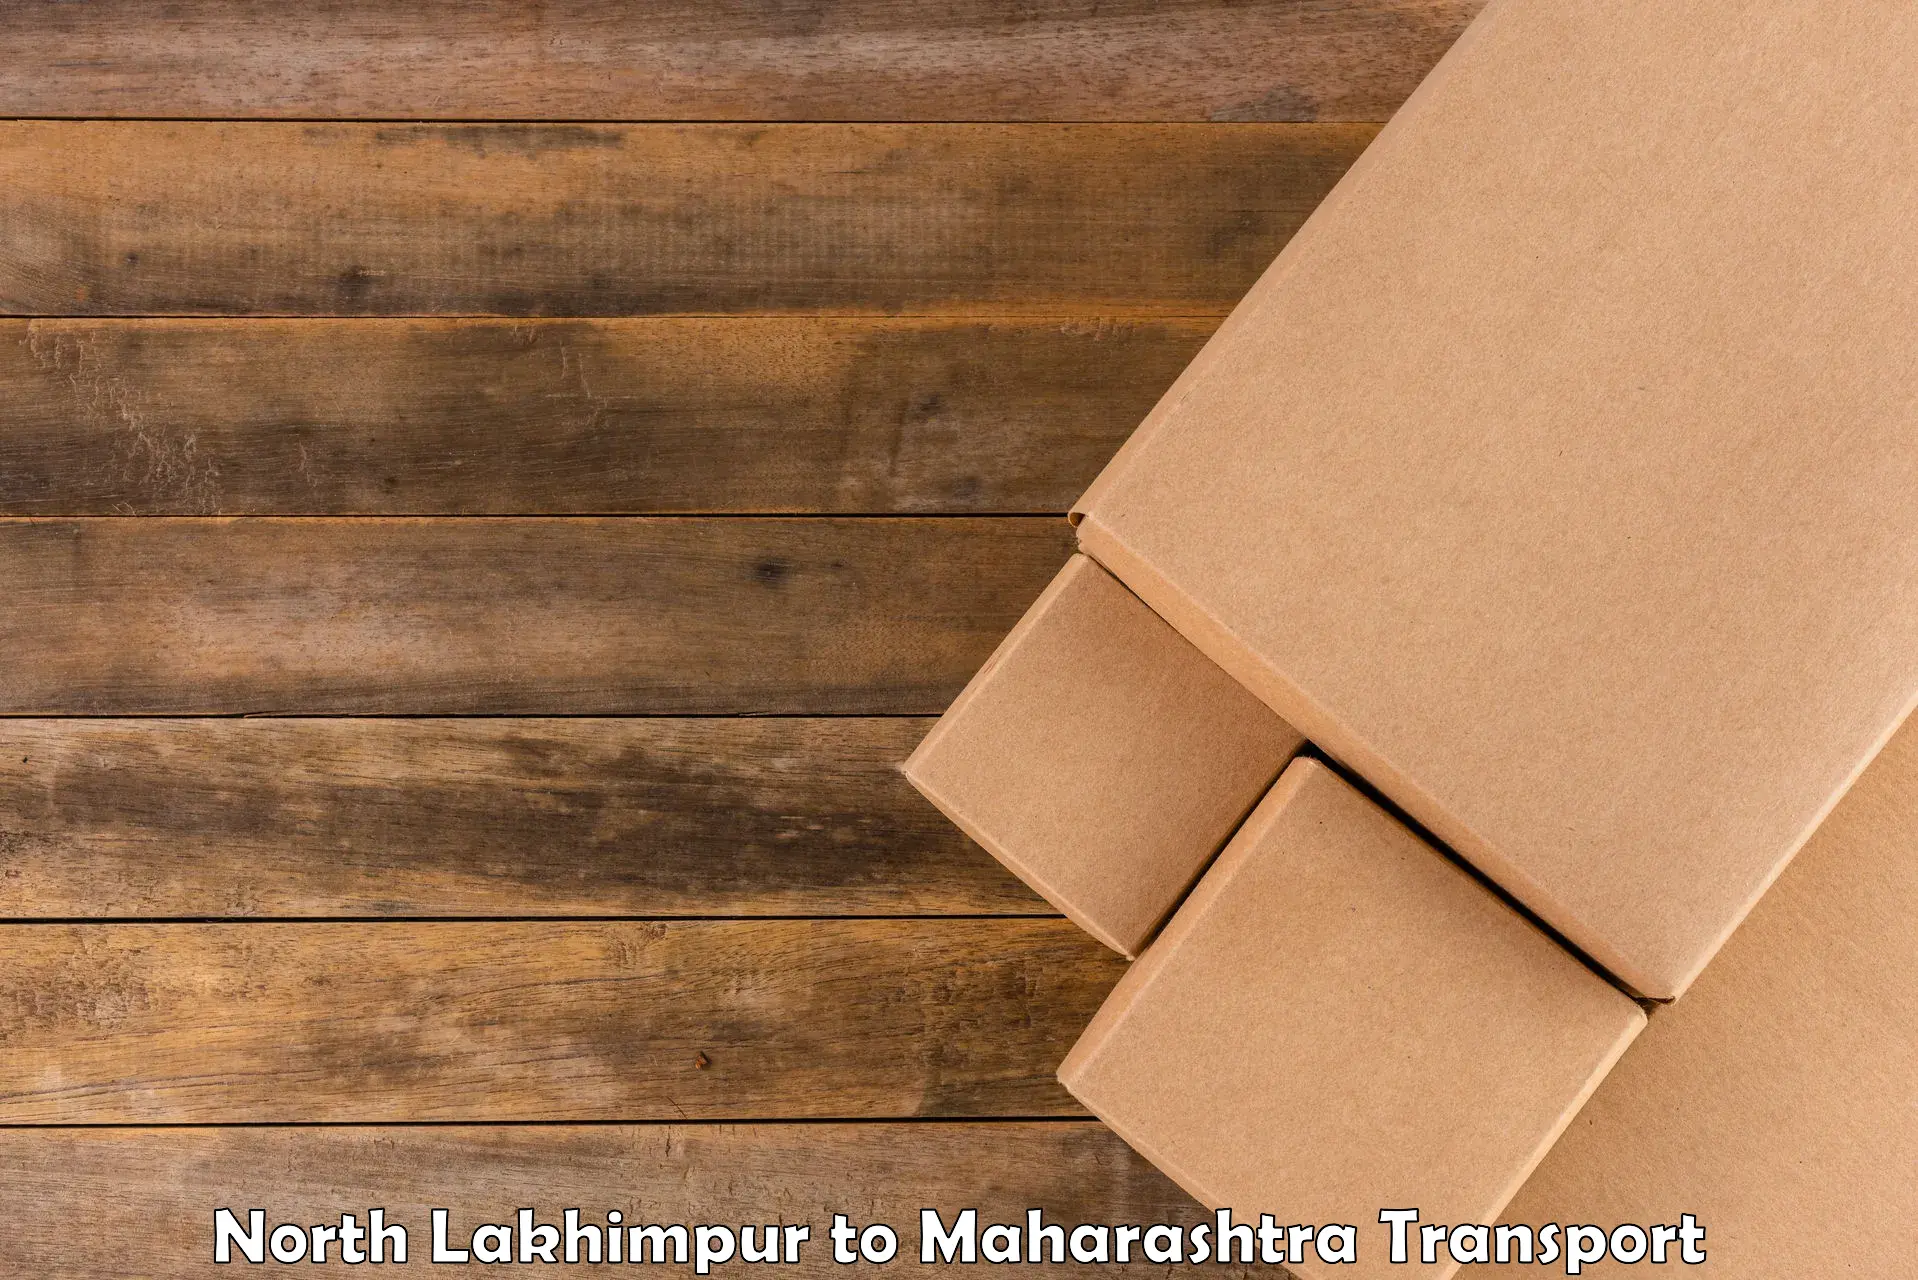 Package delivery services in North Lakhimpur to Mahabaleshwar